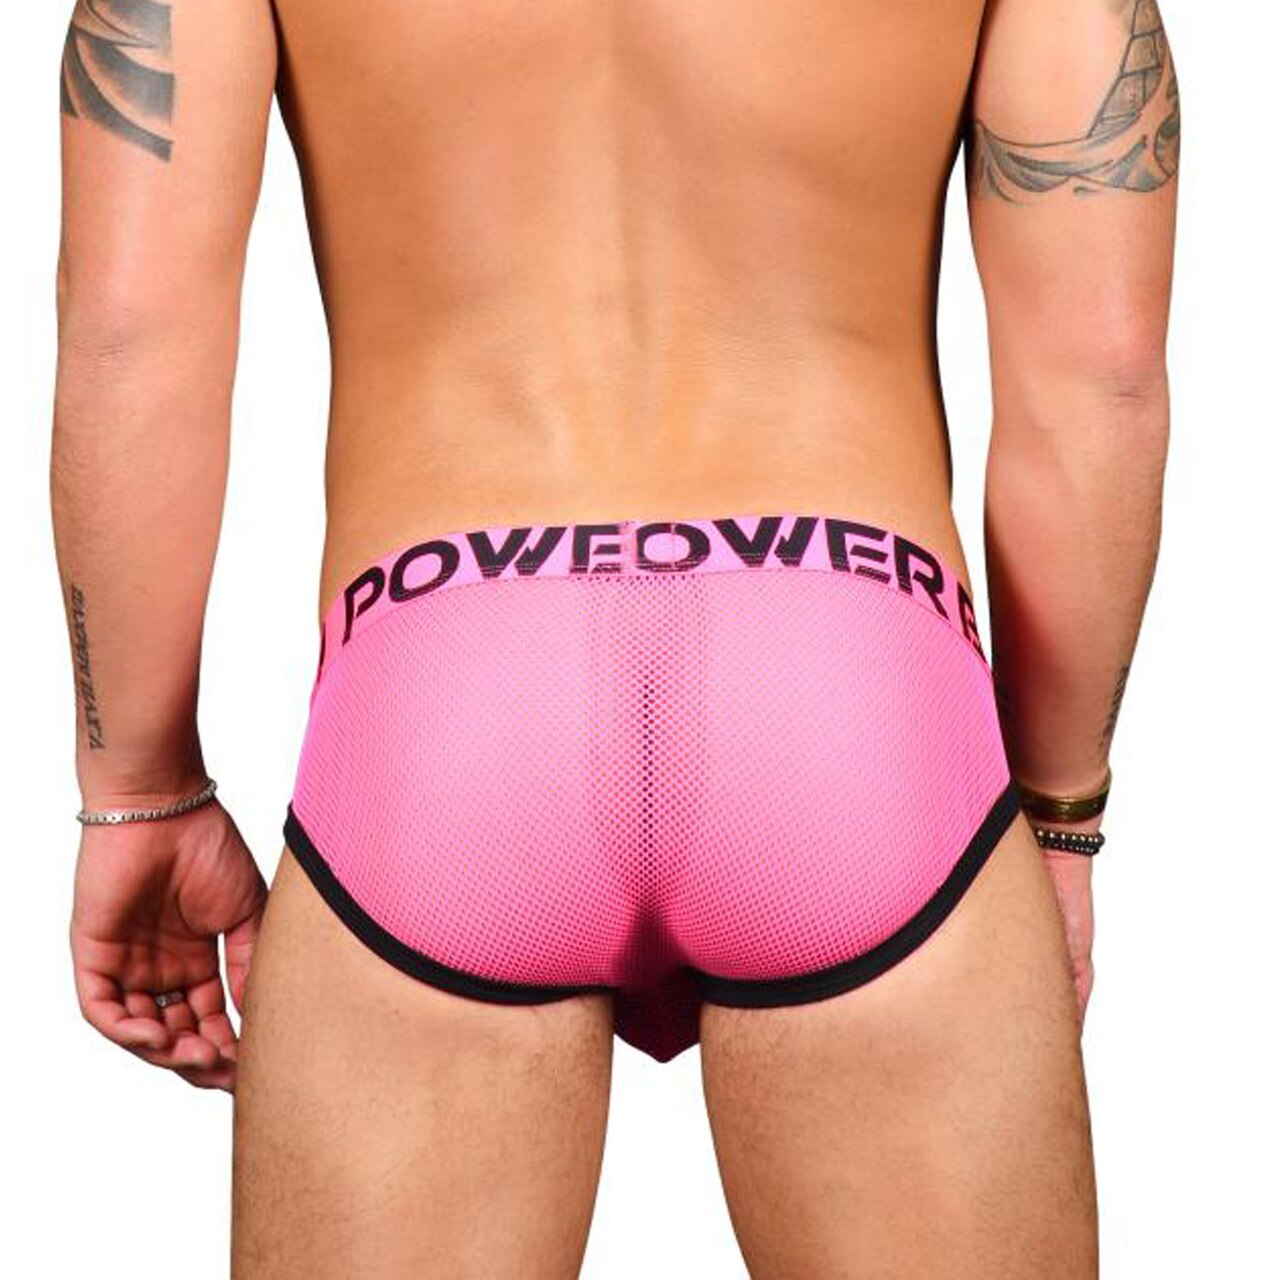 Mens Andrew Christian Power Bottom Mesh Brief w/ Almost Naked